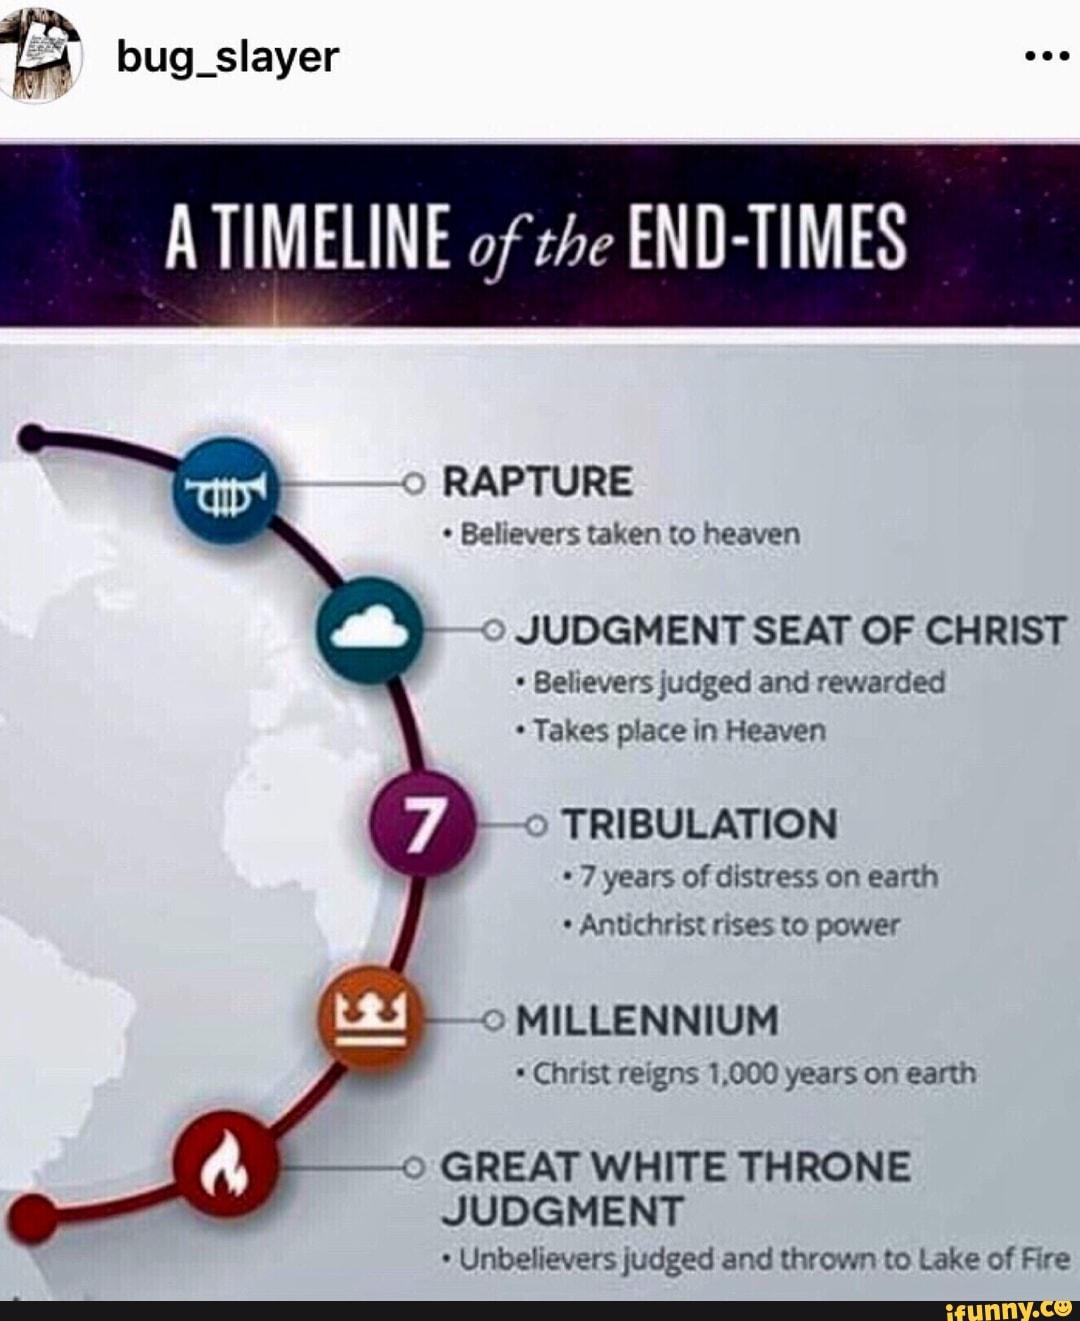 the judgment seat of christ timeline